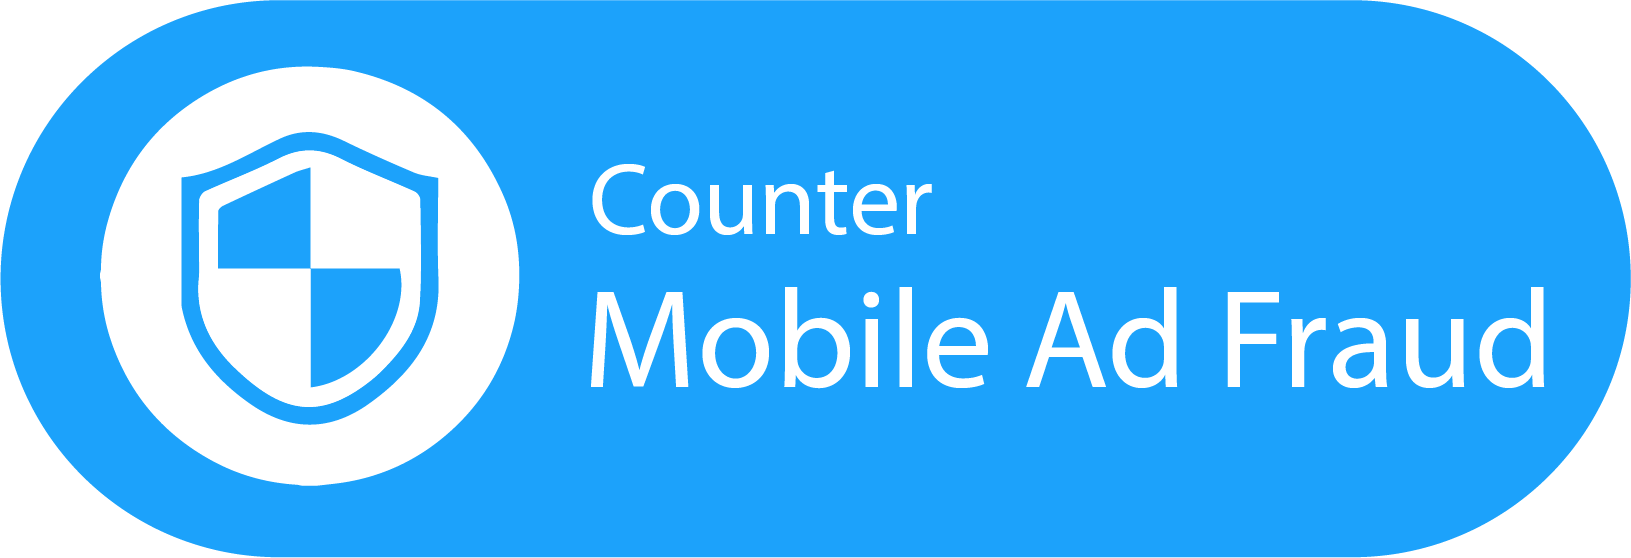 Counter Mobile Ad Fraud